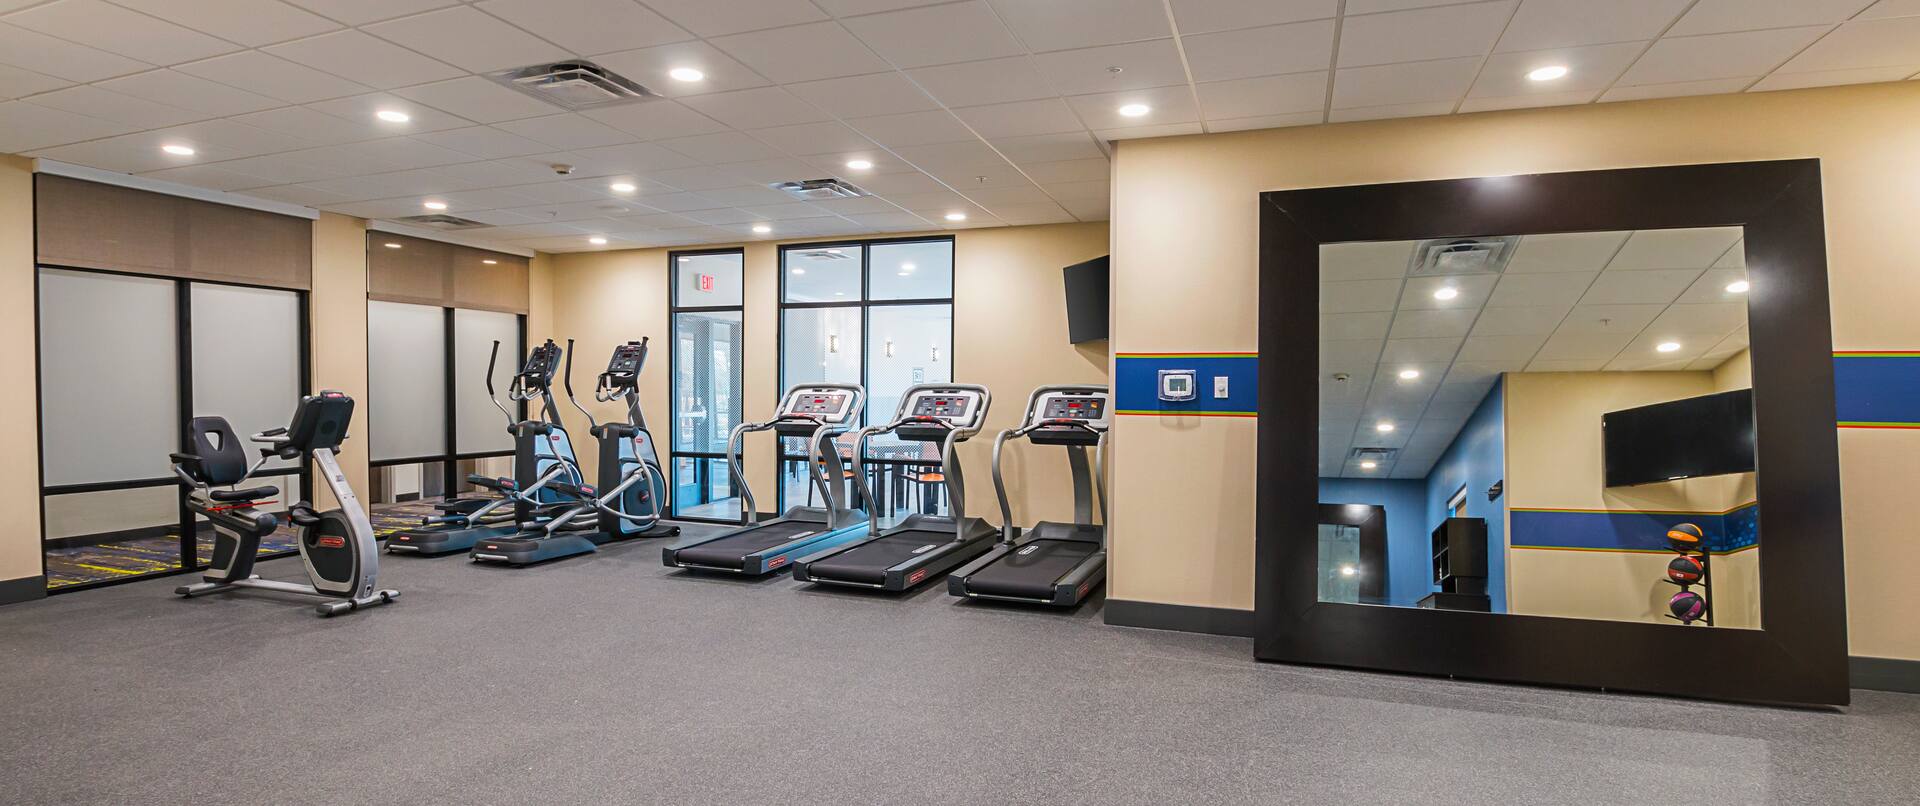 A well-lit hotel fitness center with
  treadmills, elliptical, and recumbent bike machines